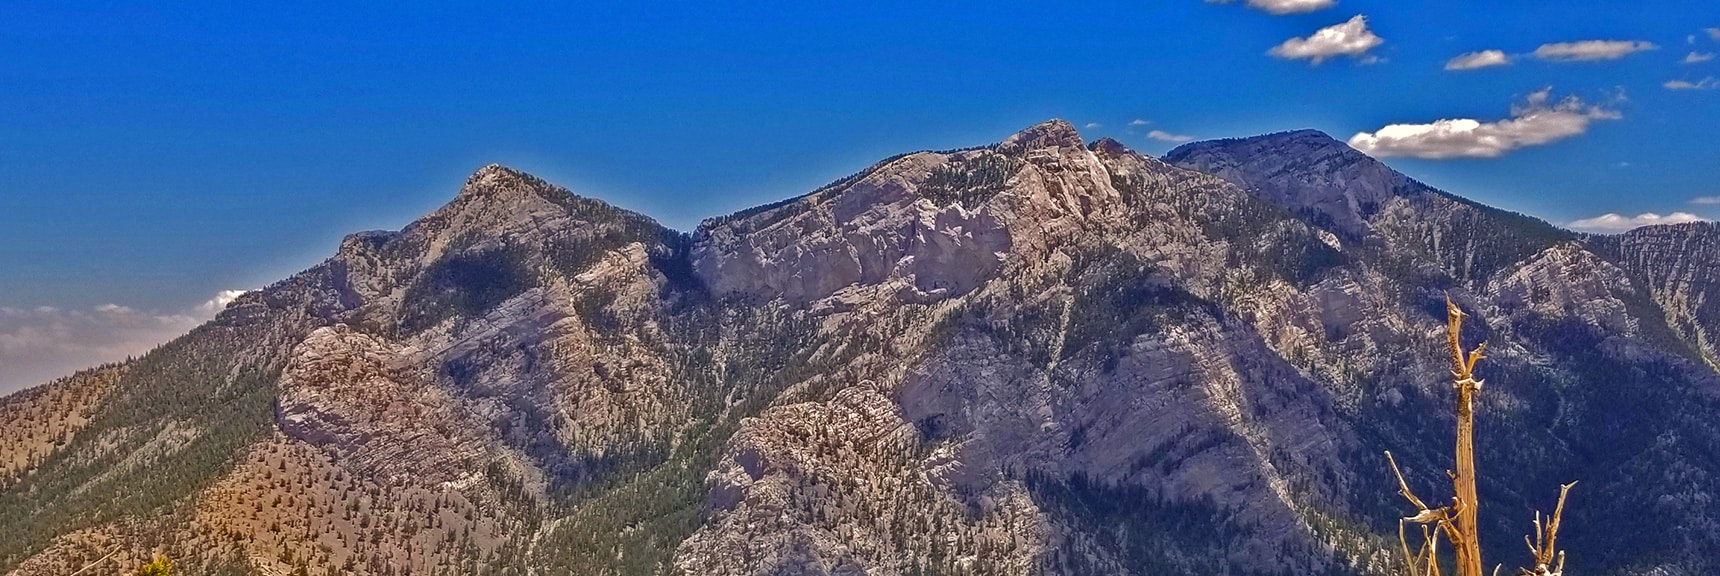 Mummy's Head Area Viewed from Across Lee Canyon Near Sisters North | Mummy Mountain Head from Lee Canyon Road | Mt Charleston Wilderness | Spring Mountains, Nevada